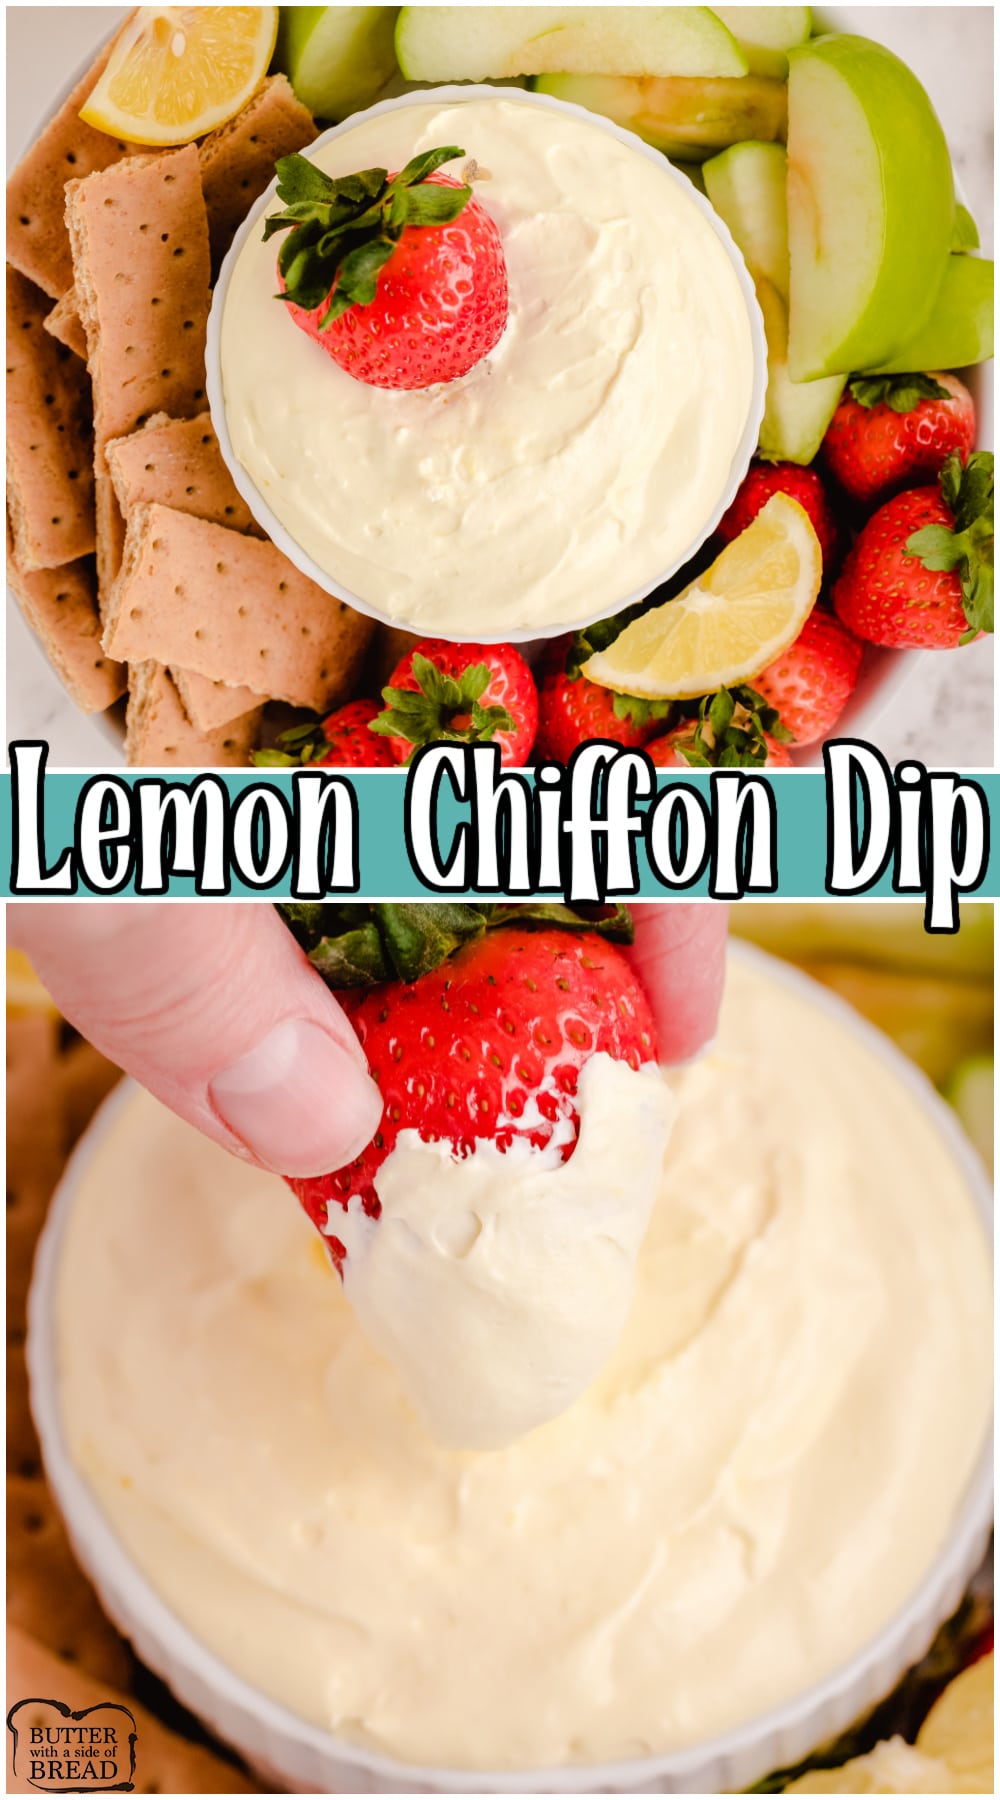 Lemon Chiffon Dip has a wonderful bright, fresh flavor and a light and creamy texture. Plus this lemon fruit dip only takes 5 minutes to make and it is ready to serve!